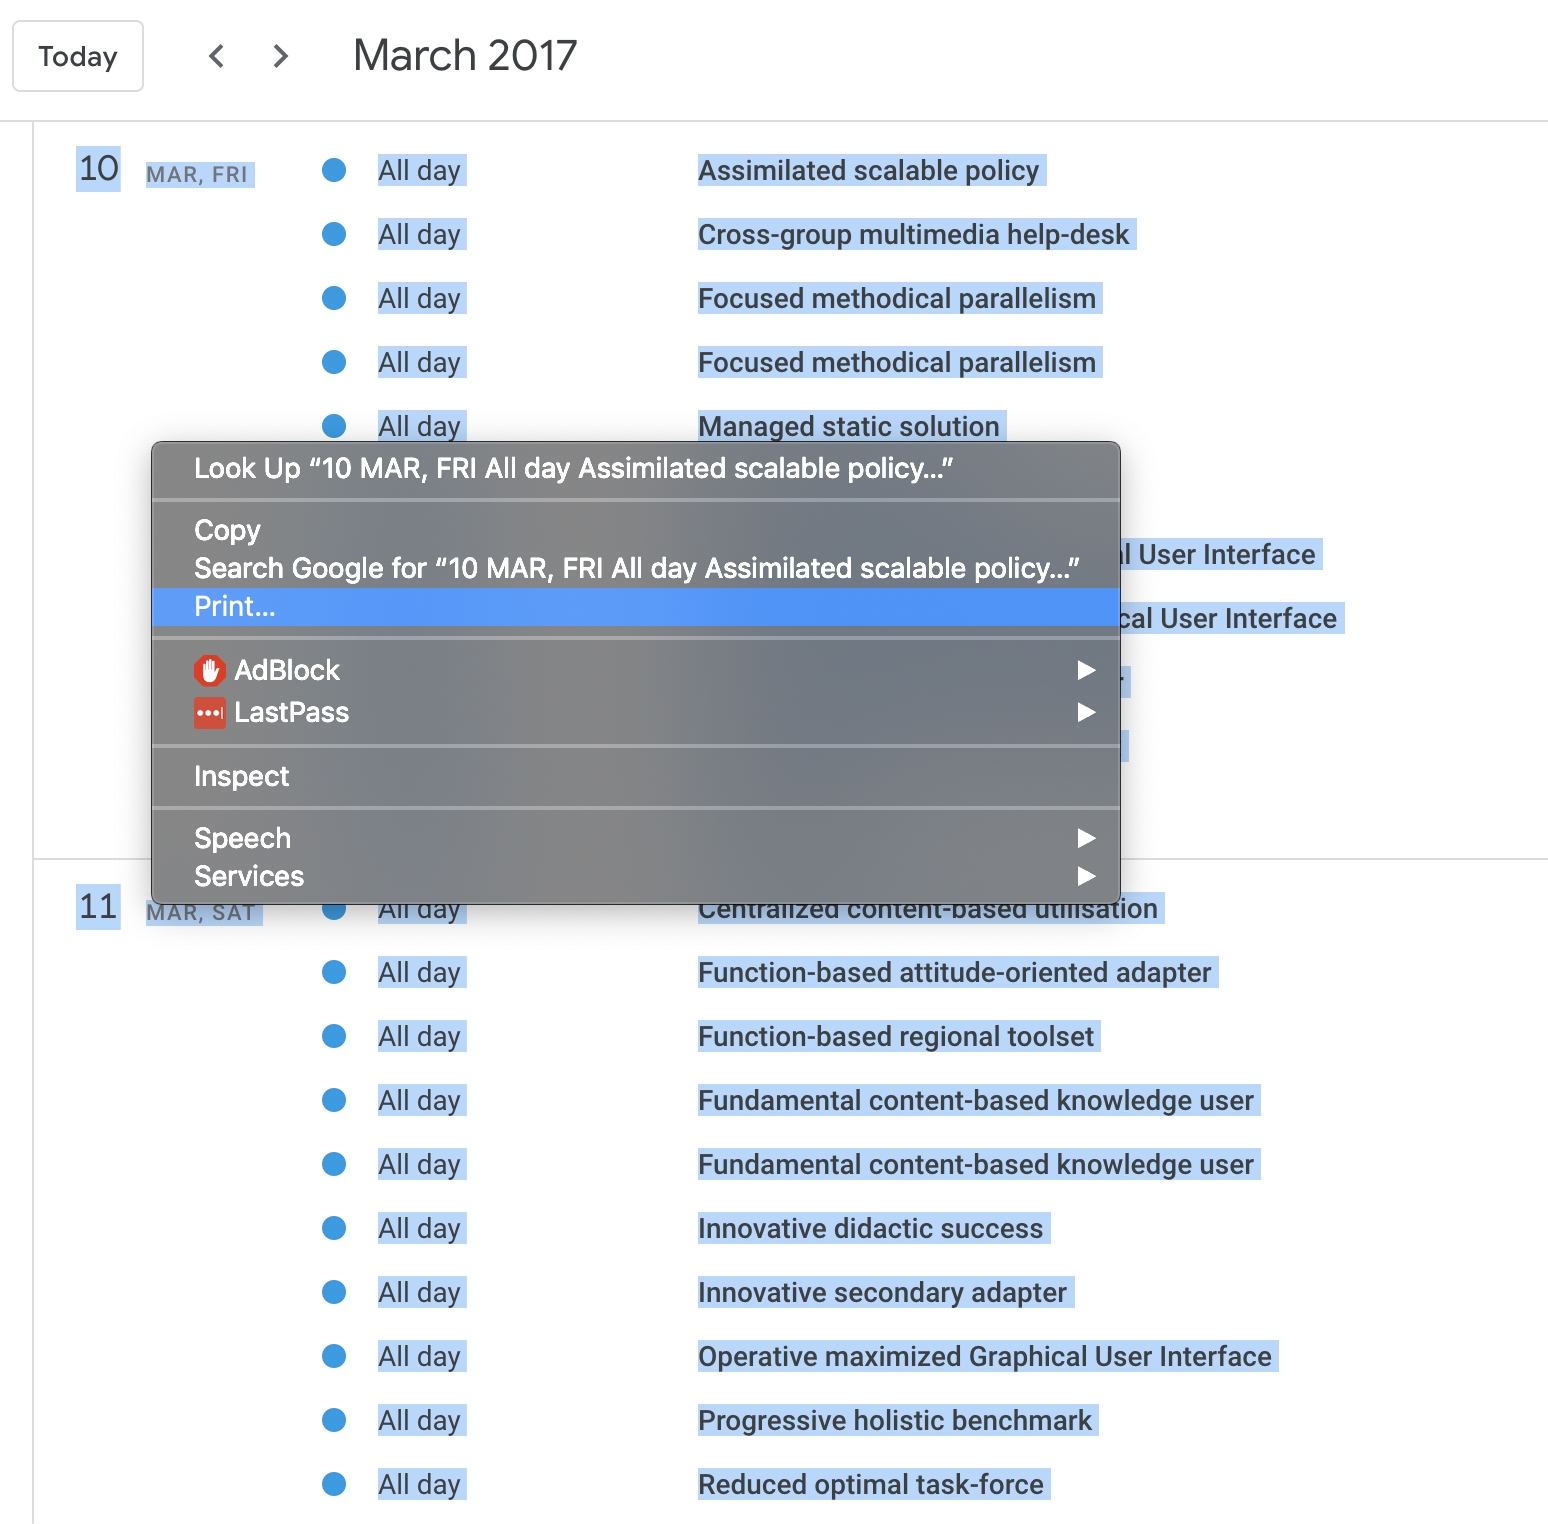 How To Get Rid Of &quot;create&quot; Bug&quot; That Overlays My Calendar